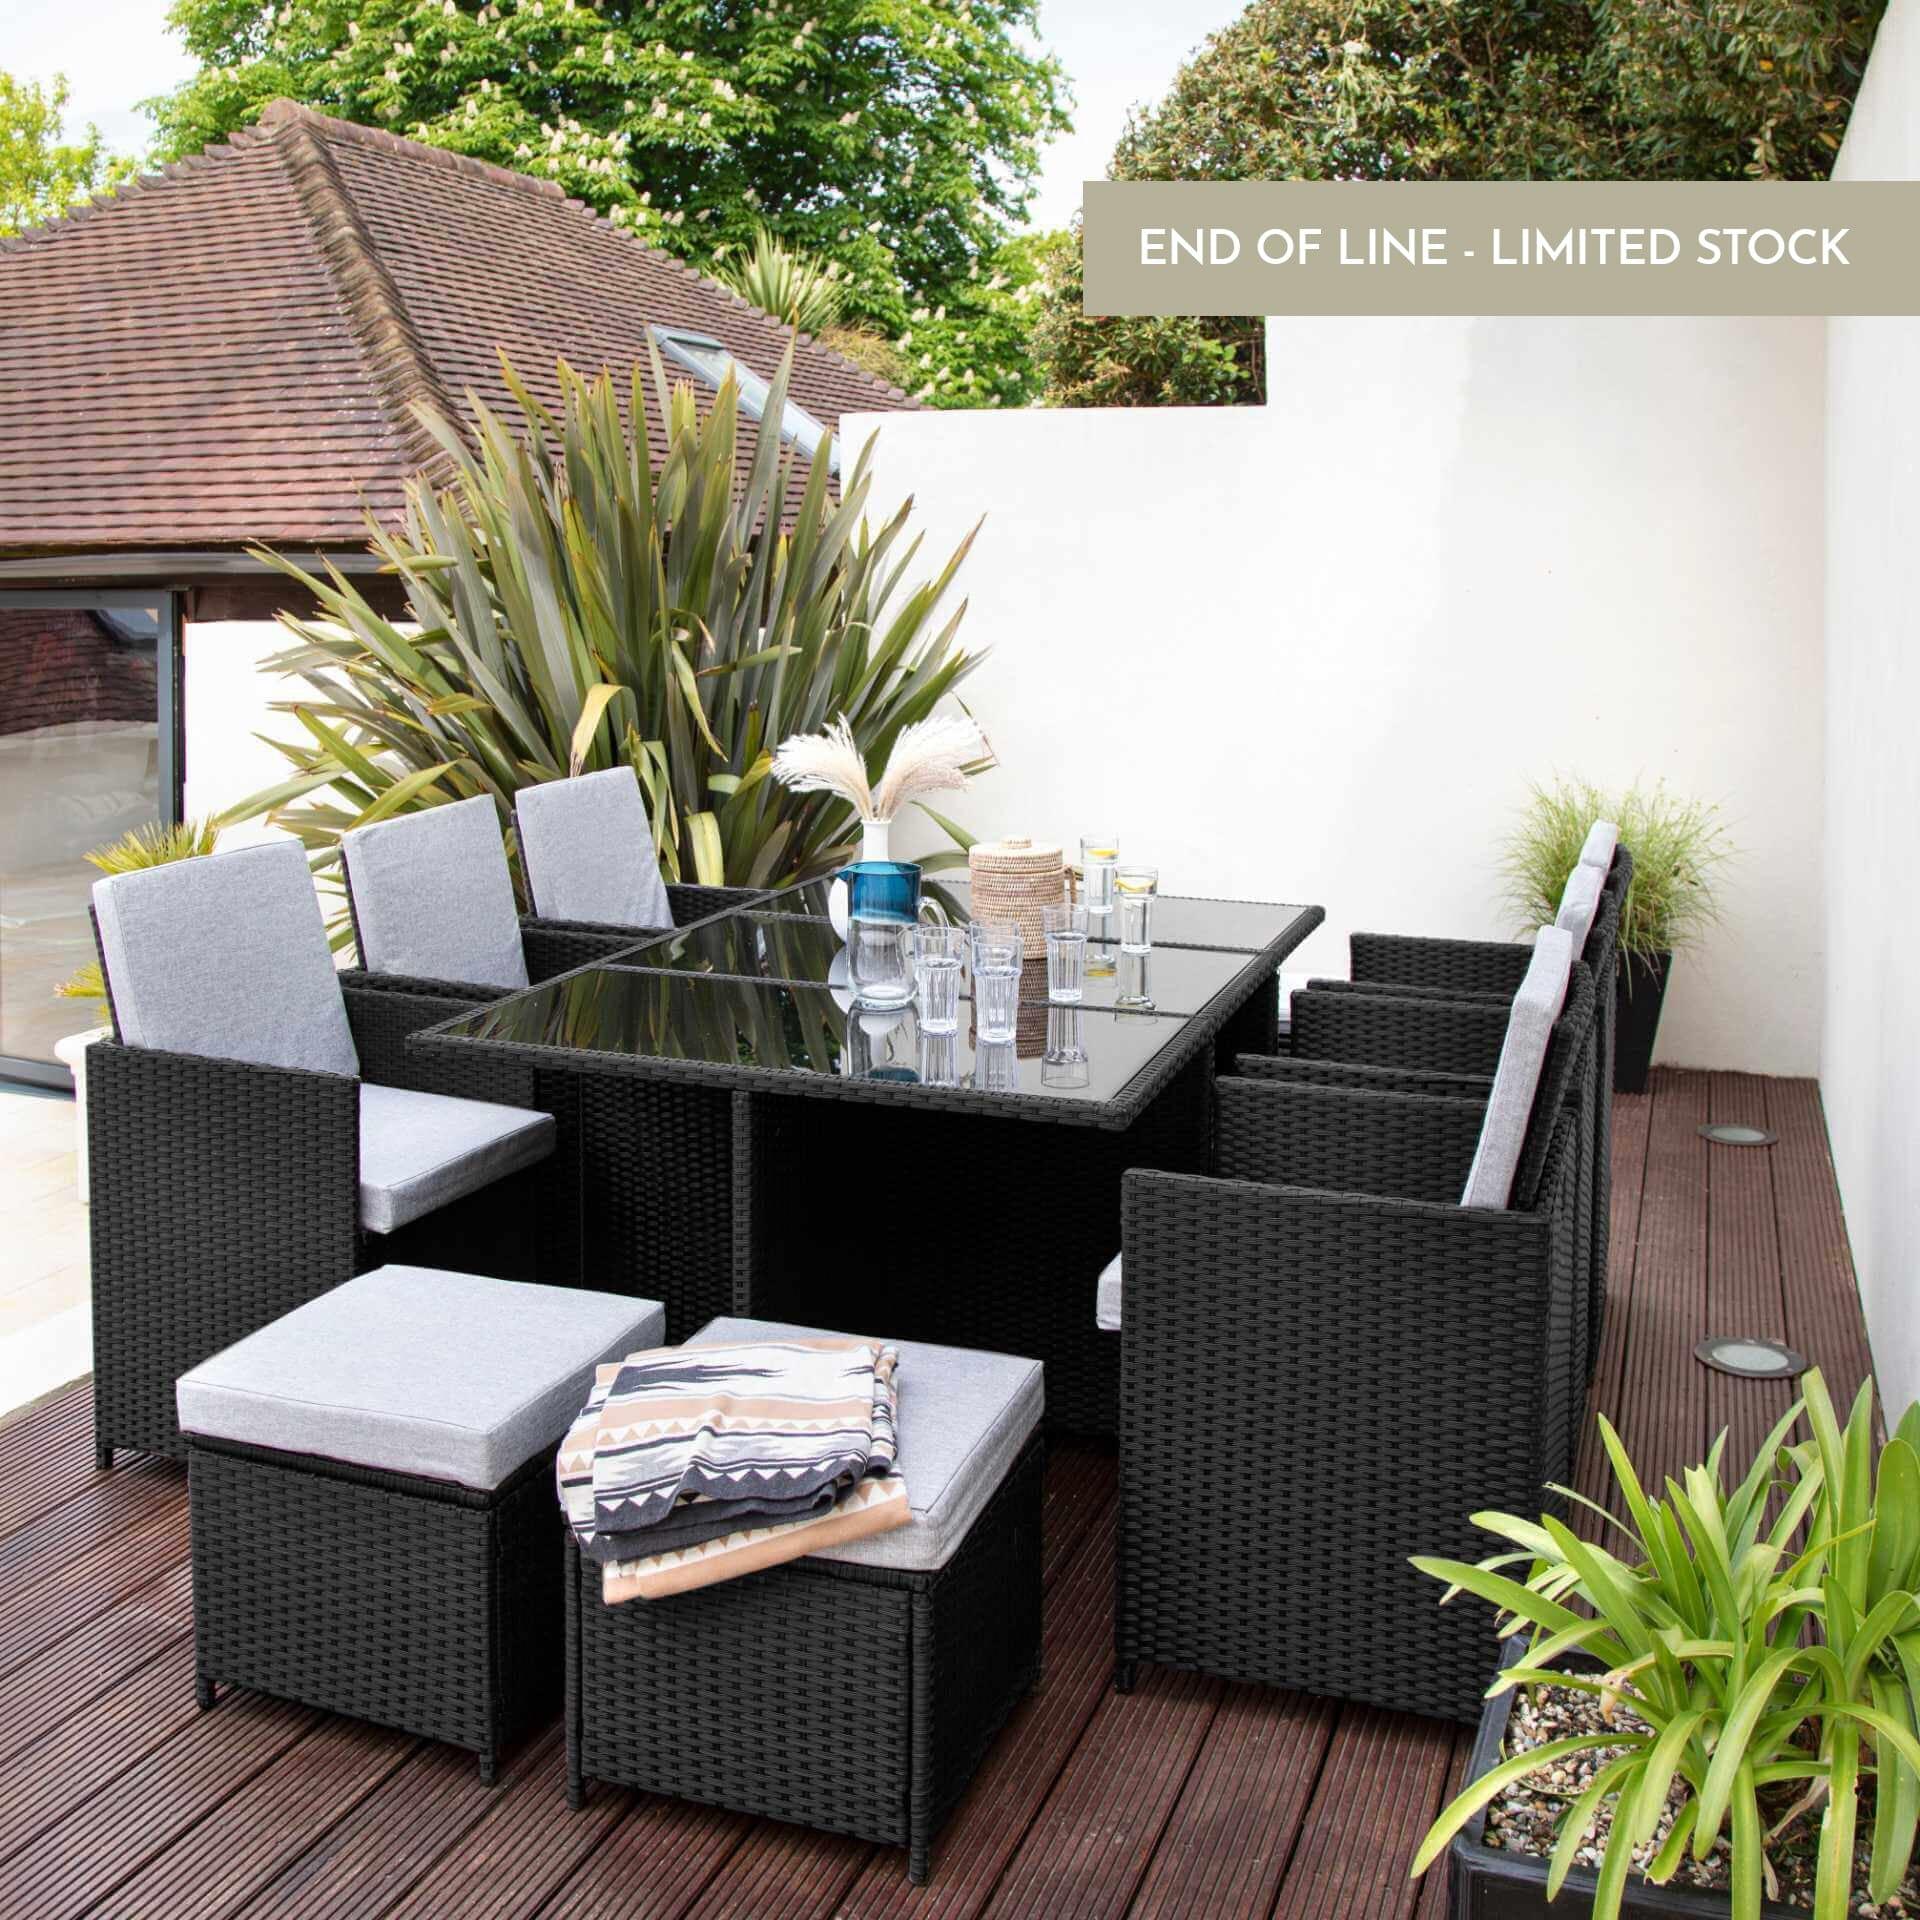 10 Seater Rattan Cube Outdoor Dining Set - Black Weave - 2023